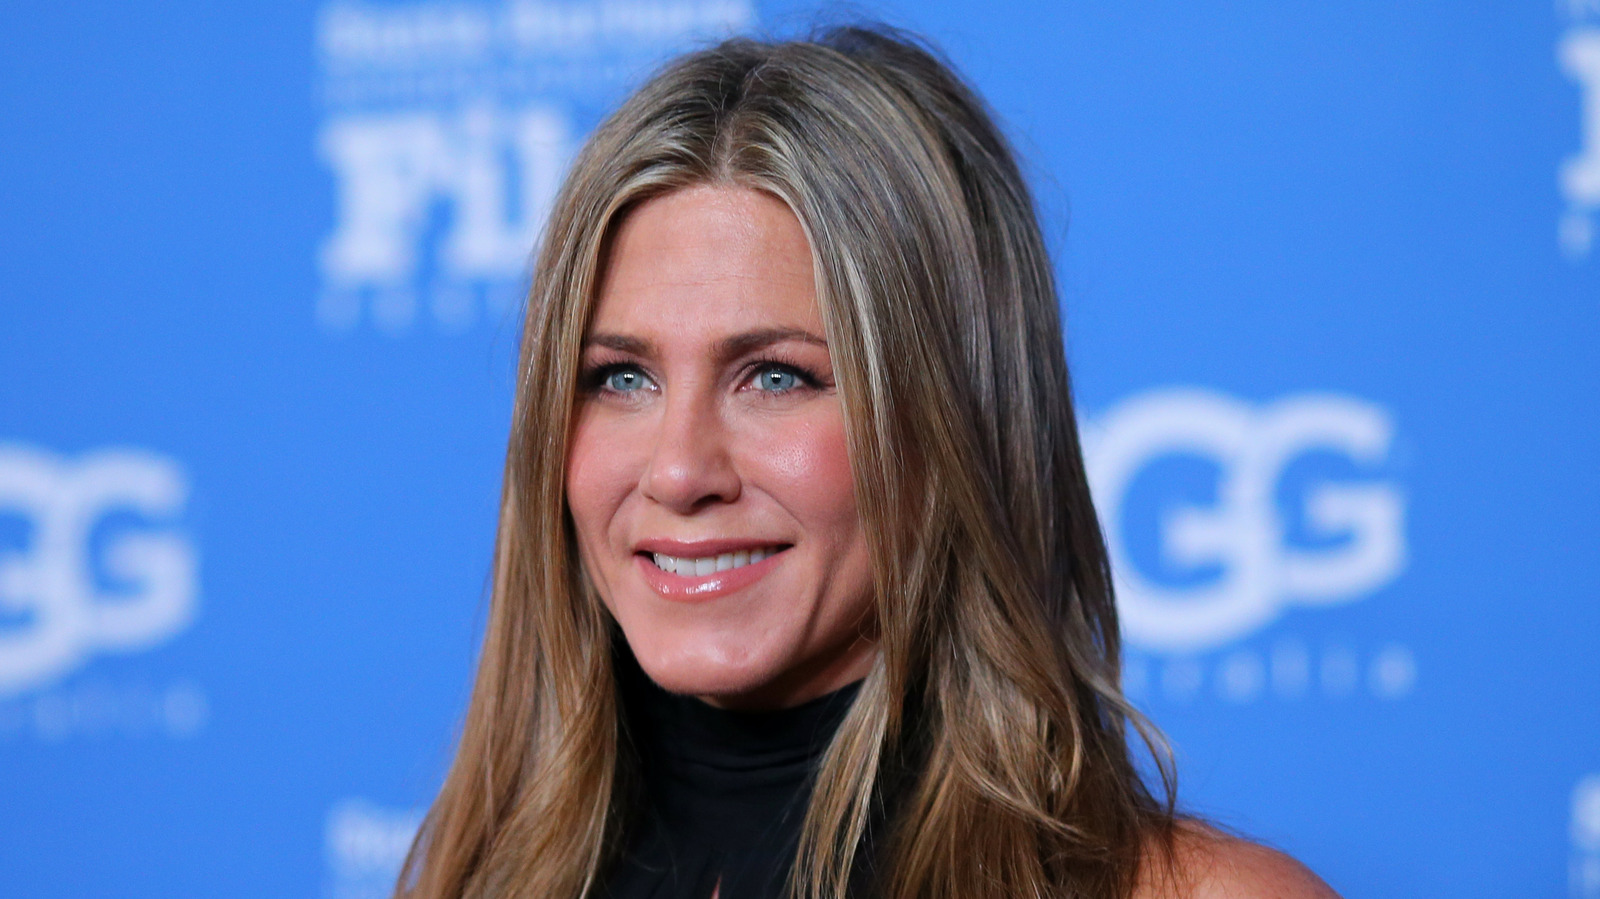 A Look At Jennifer Aniston's Complicated Relationship With Her Parents